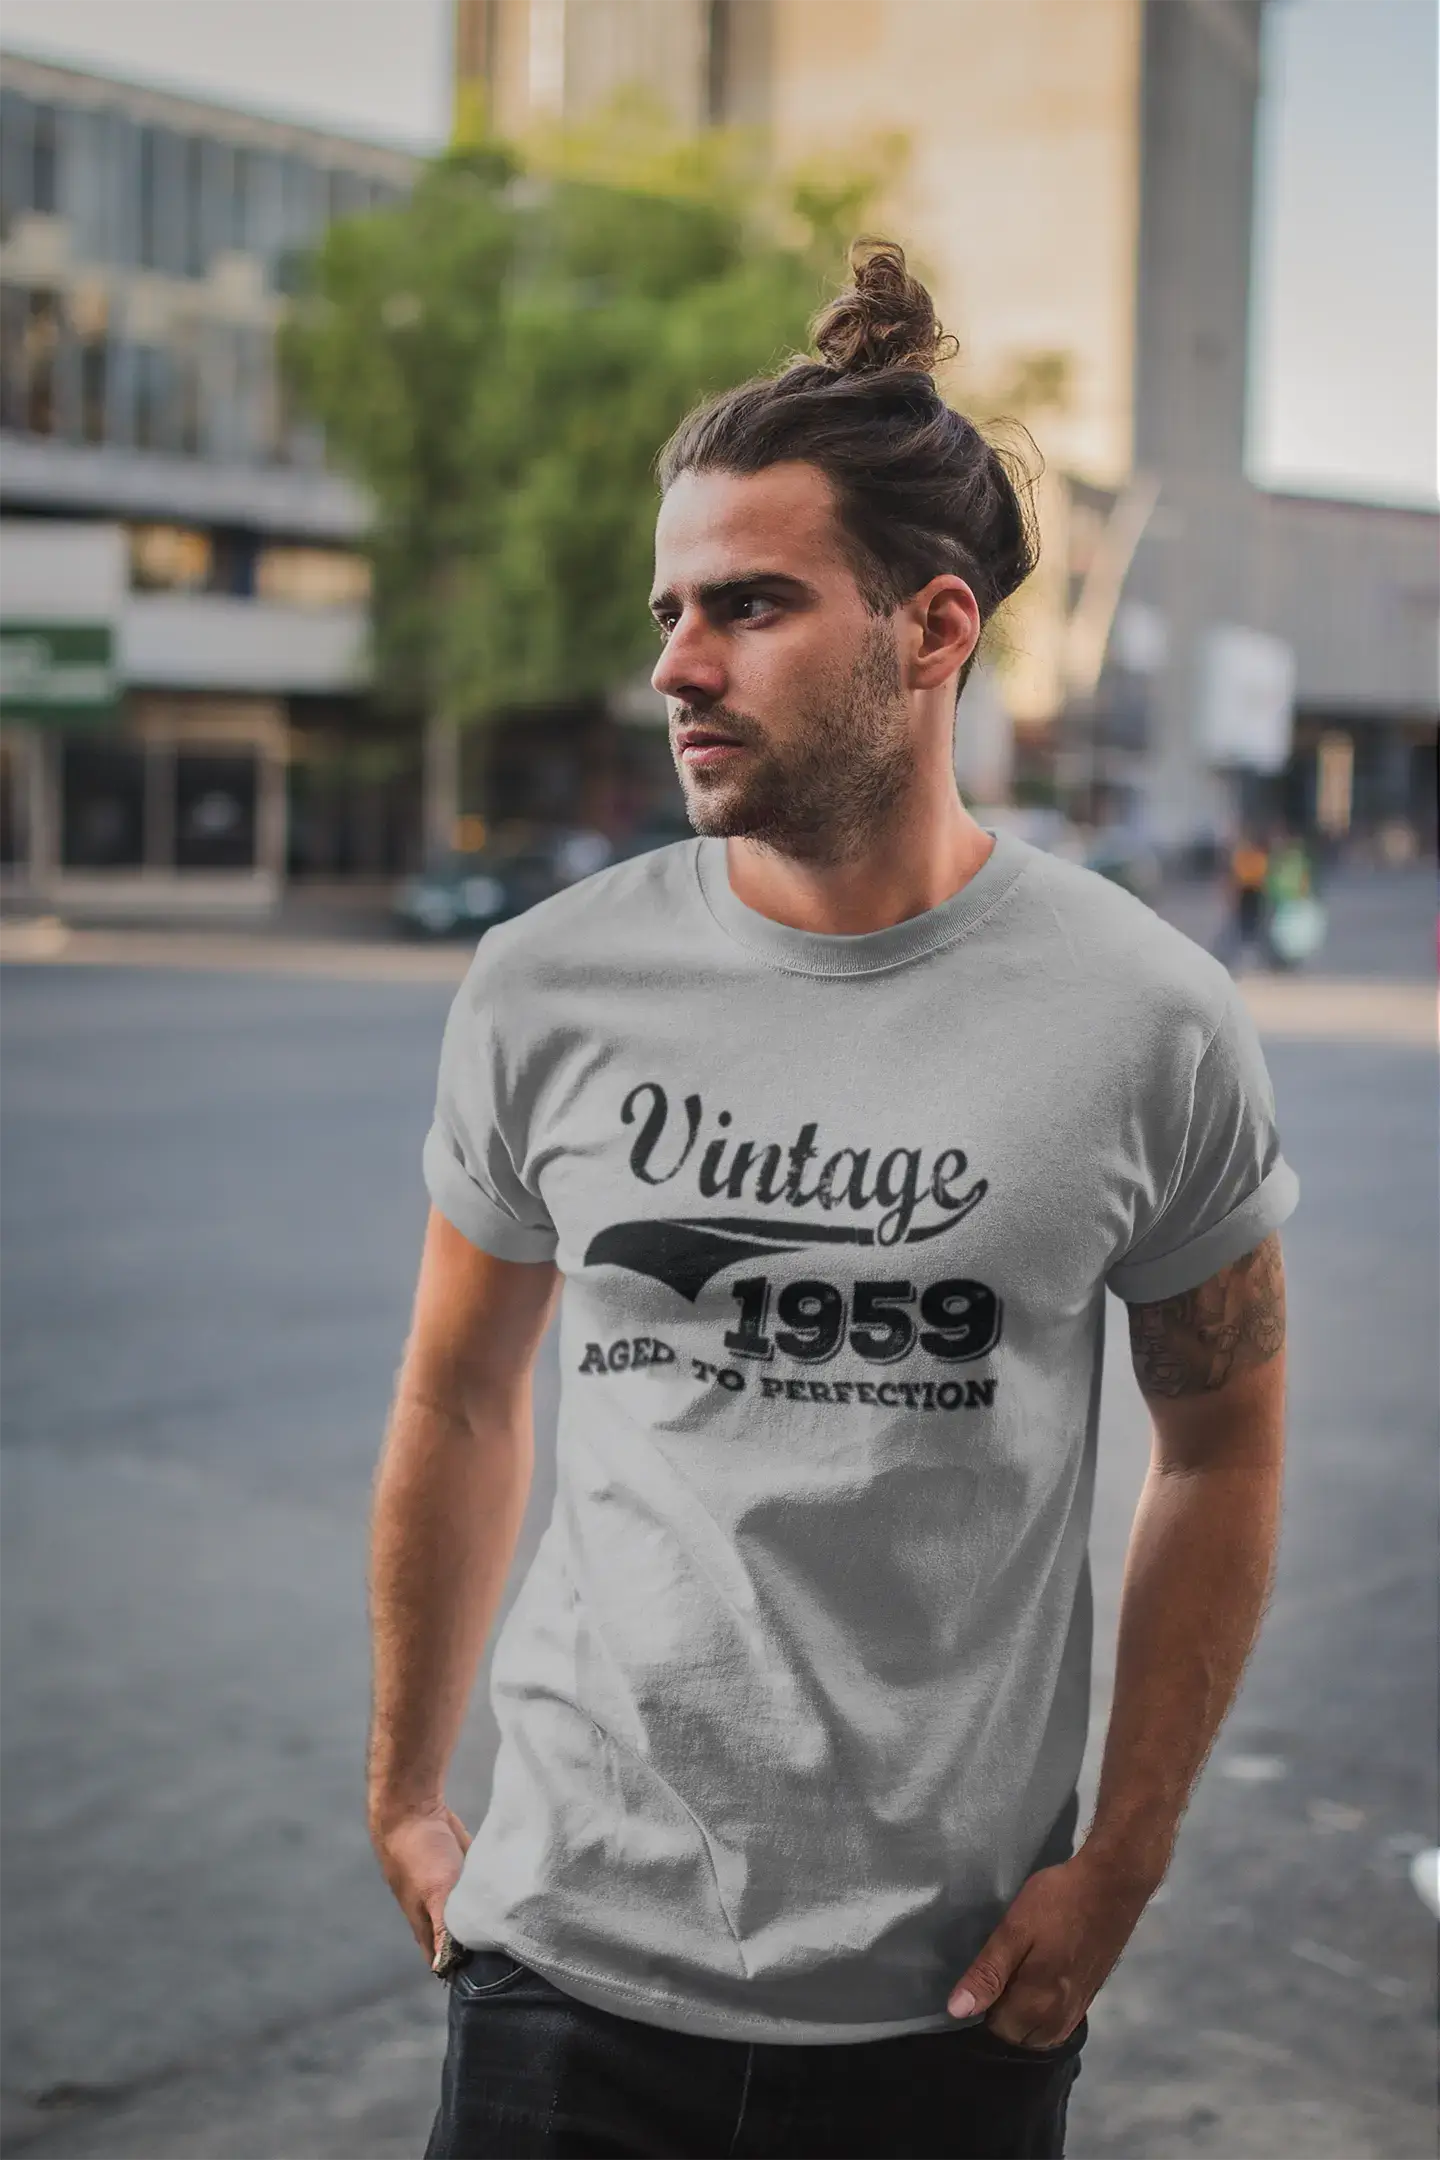 Vintage Aged to Perfection 1959, Grey, Men's Short Sleeve Round Neck T-shirt, gift t-shirt 00346